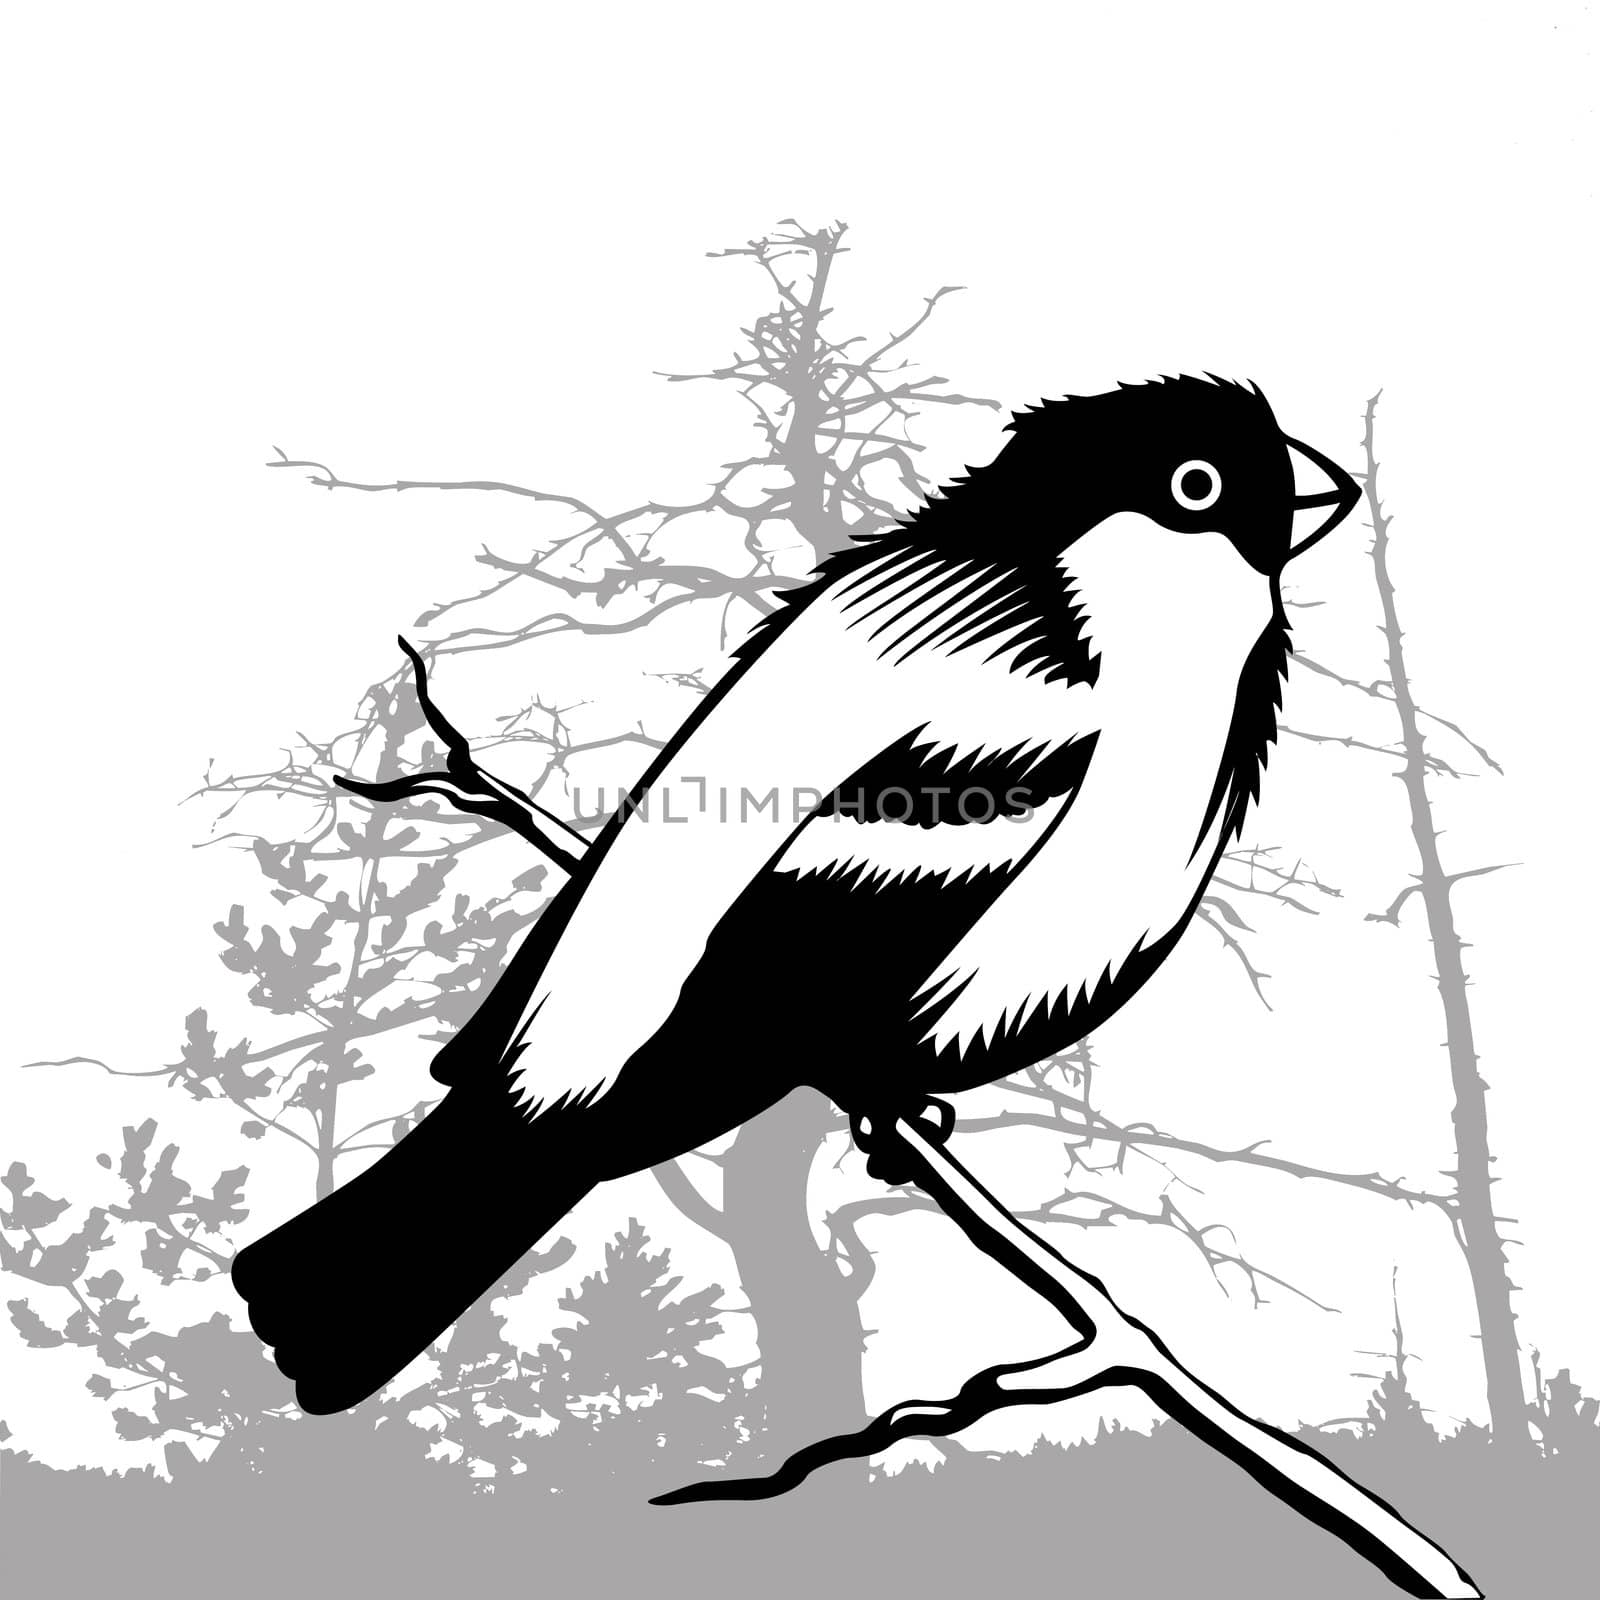 bird silhouette on wood background, vector illustration by basel101658